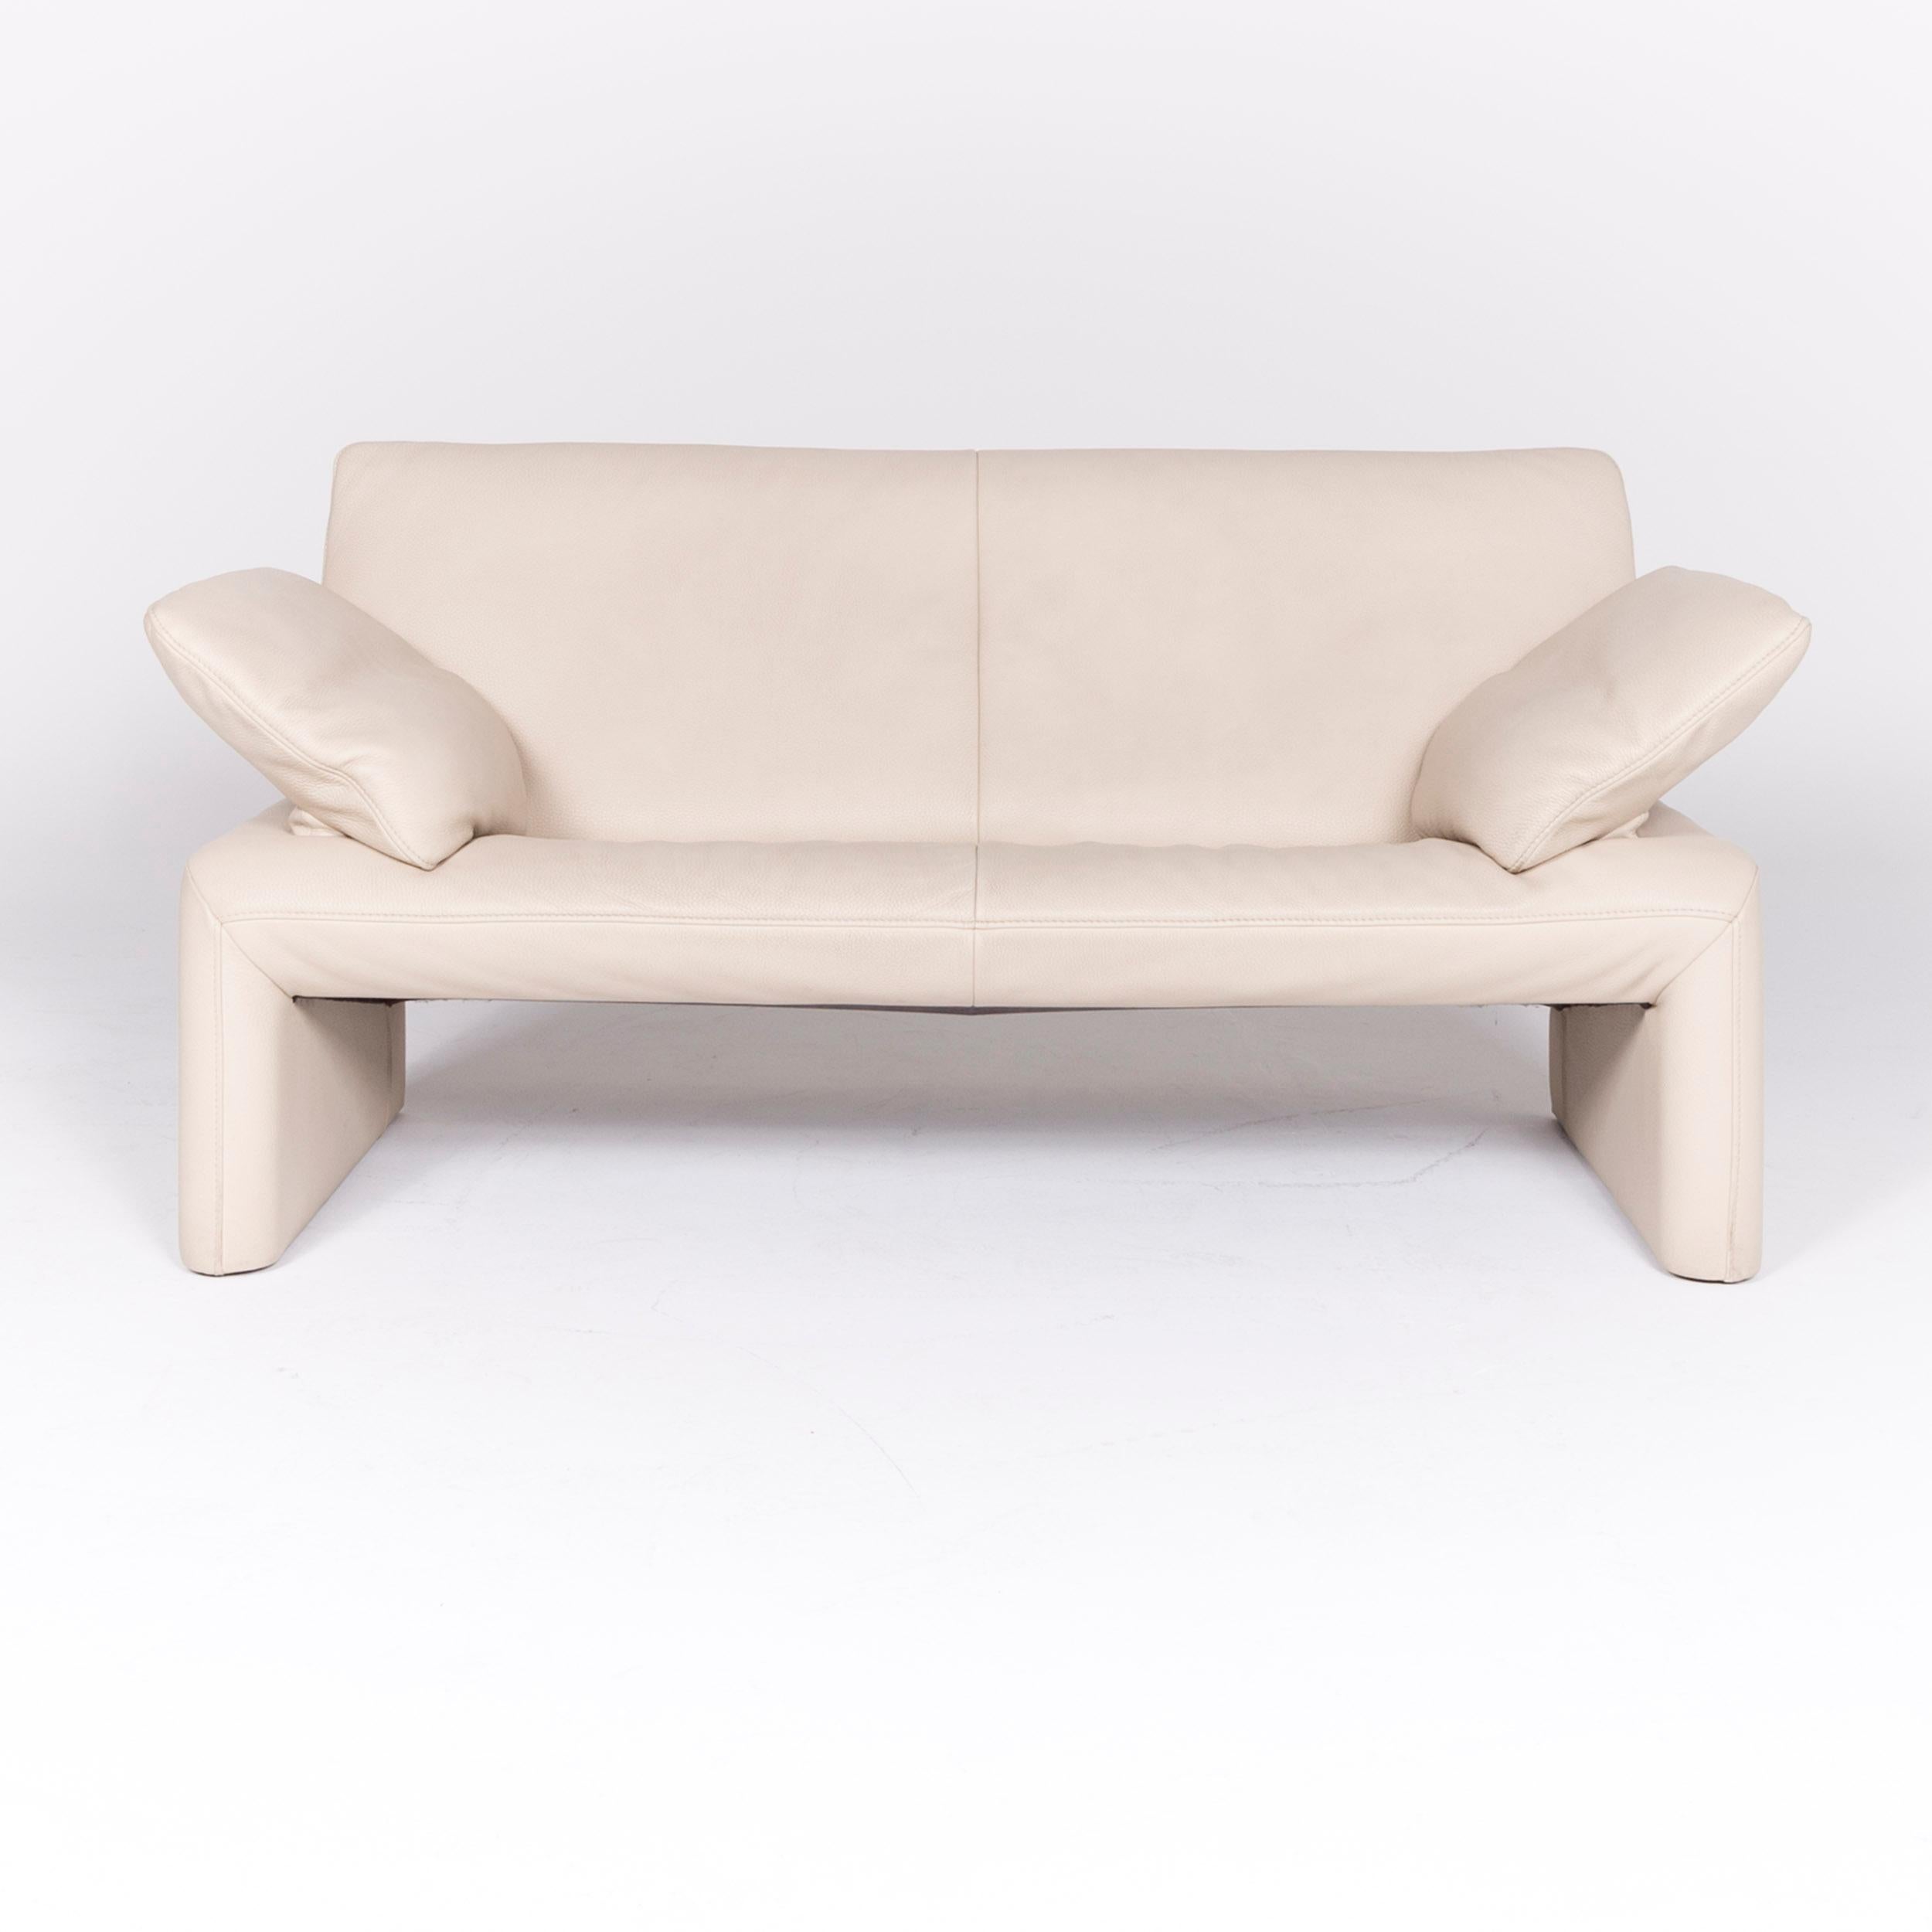 Belgian JORI Linea Designer Leather Sofa Beige Real Leather Two-Seat Couch